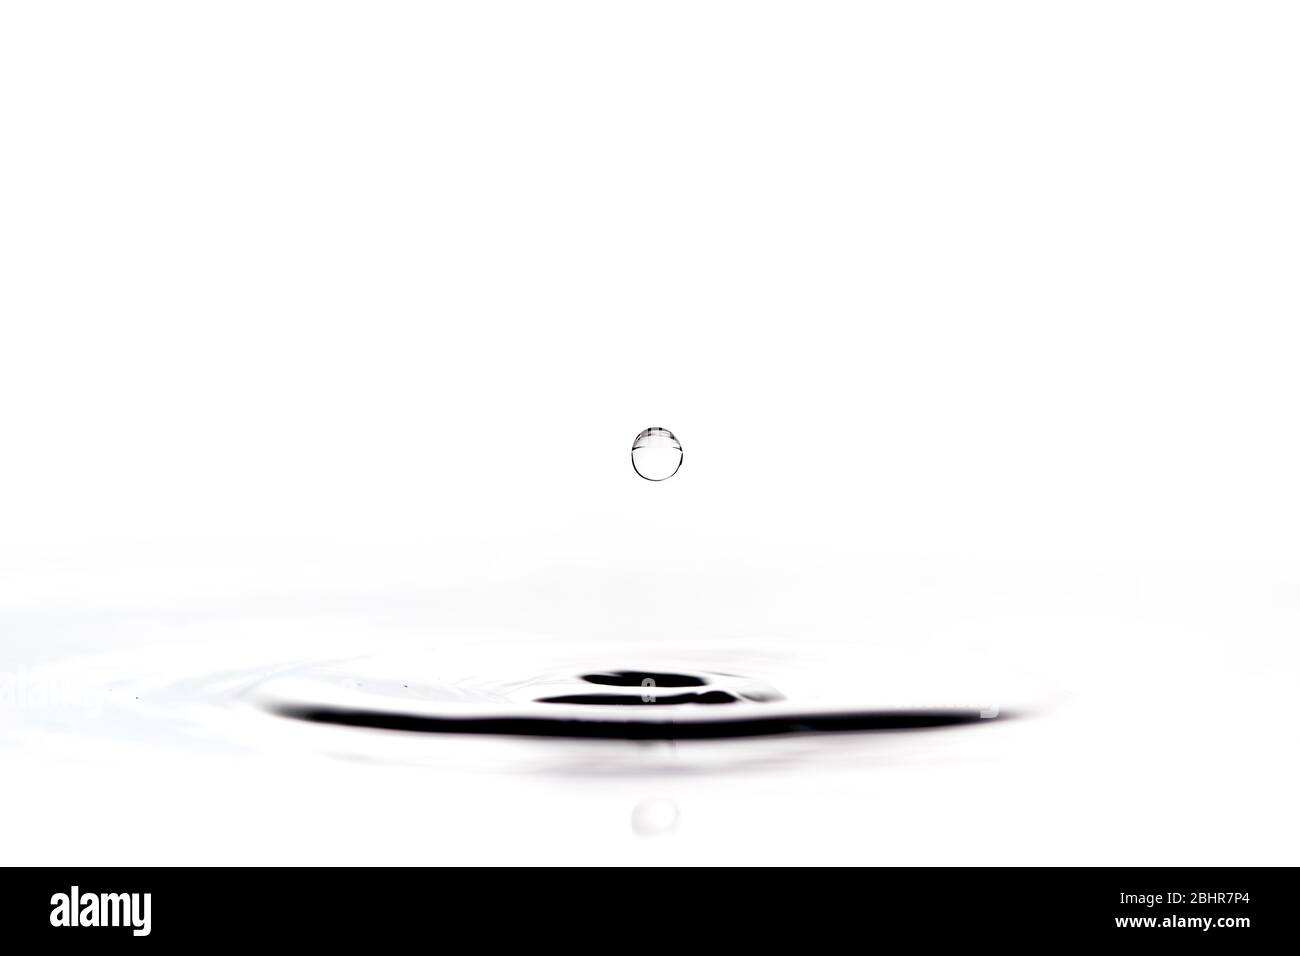 Water droplet Cut Out Stock Images & Pictures - Alamy